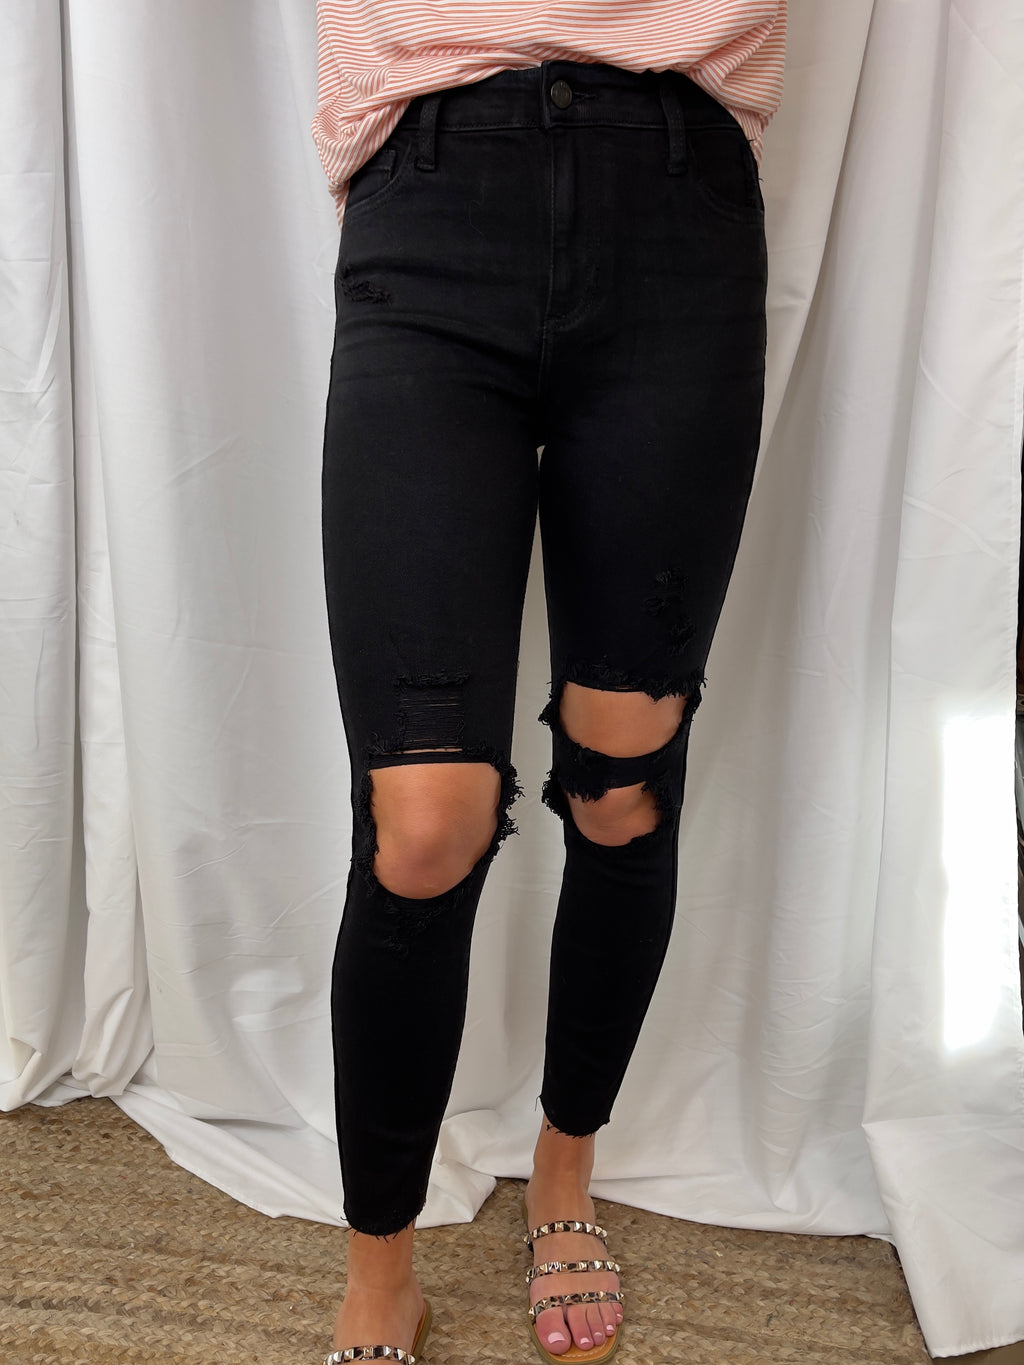 Fitted through the hip and more relaxed through the thigh & knee, our mom skinny jean offers a fit that’s as flattering as it is comfortable. Inspired by the 90s, this jet black wash style with big cutouts along with frayed hem detail gives your look an authentic, vintage vibe.   Inseam: 27"  Rise: 11"